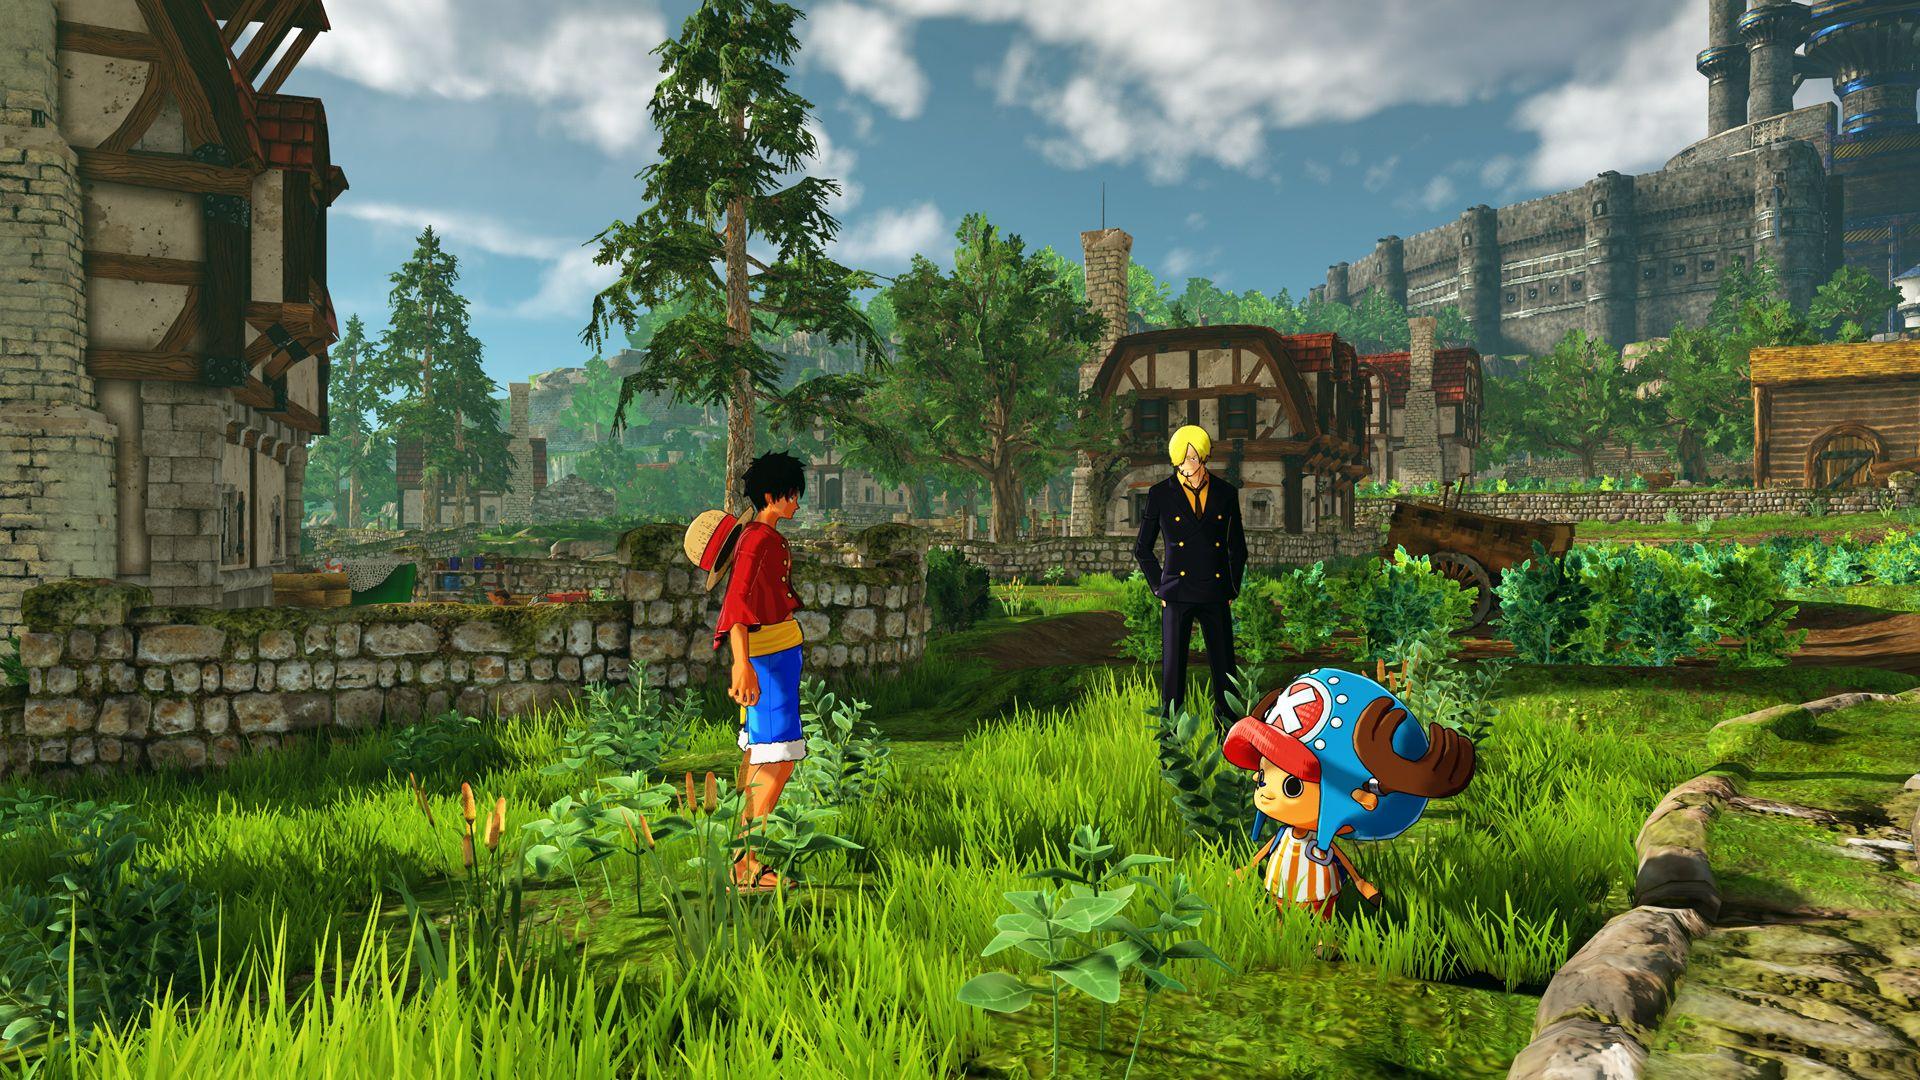 All Games Delta: One Piece: World Seeker new areas and Straw Hat